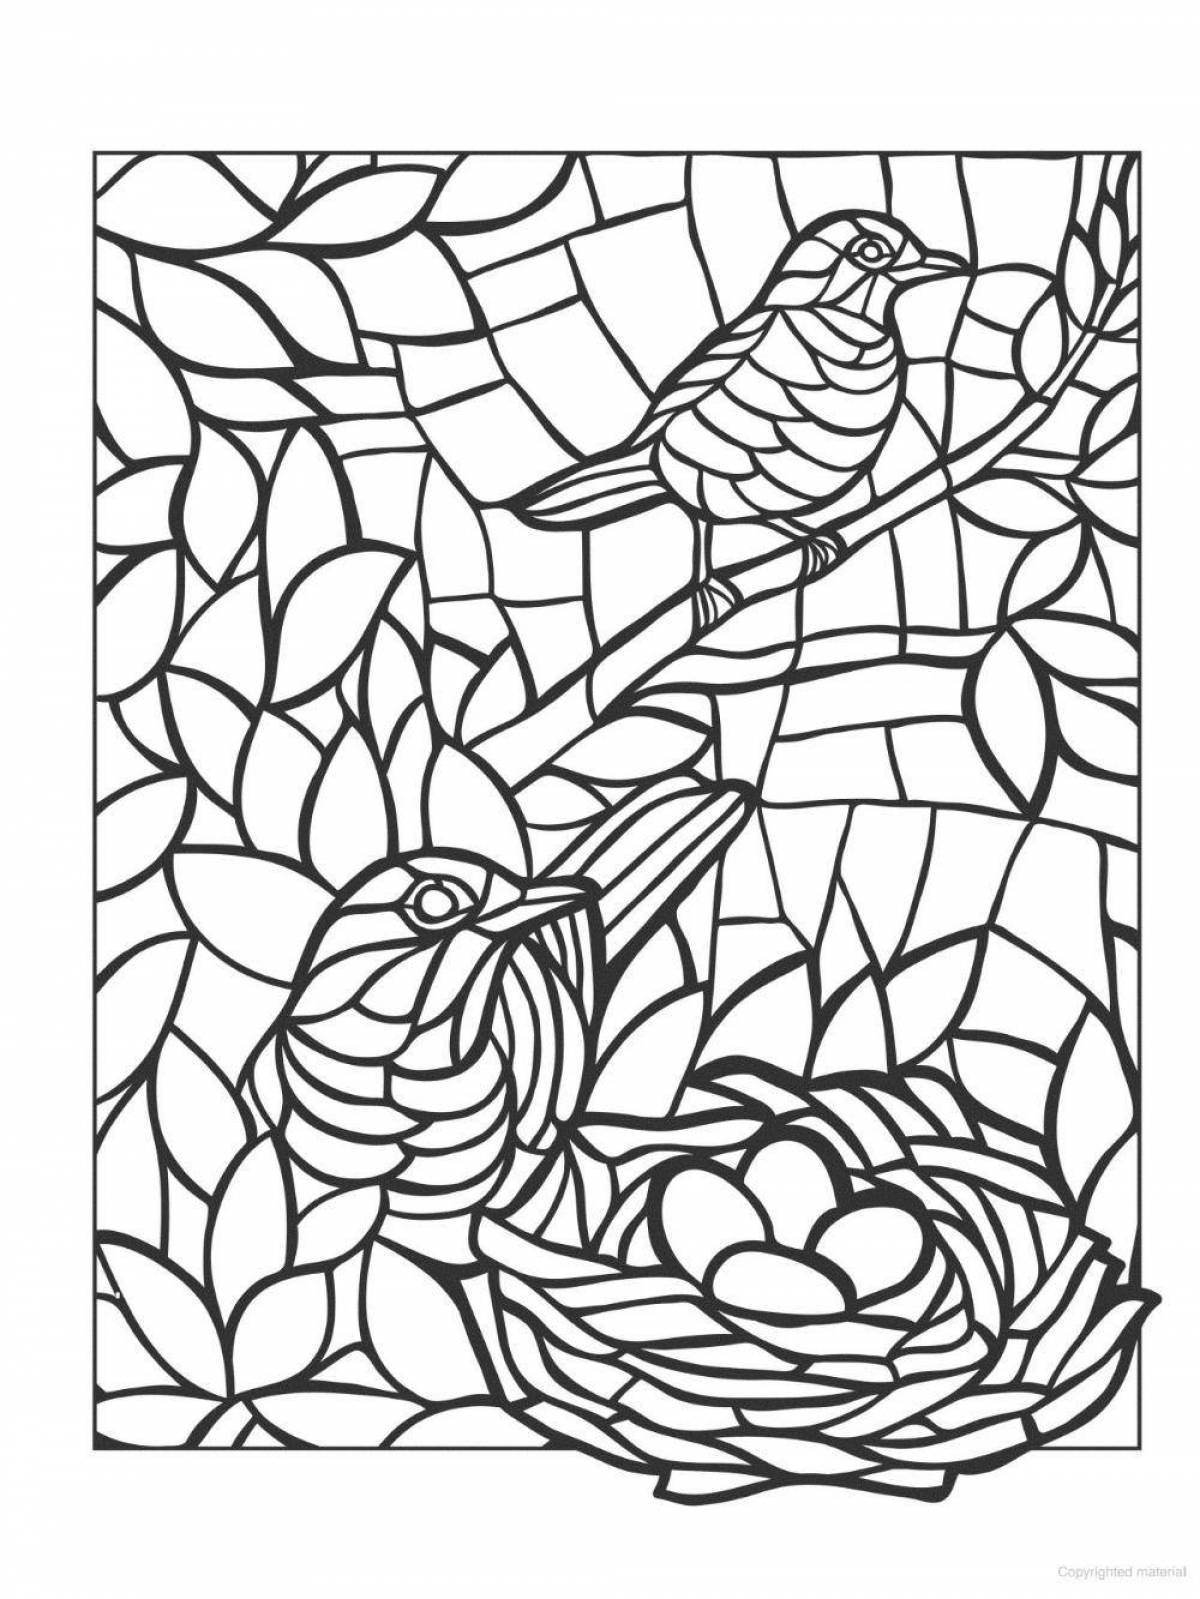 Exquisite stained glass coloring book for kids